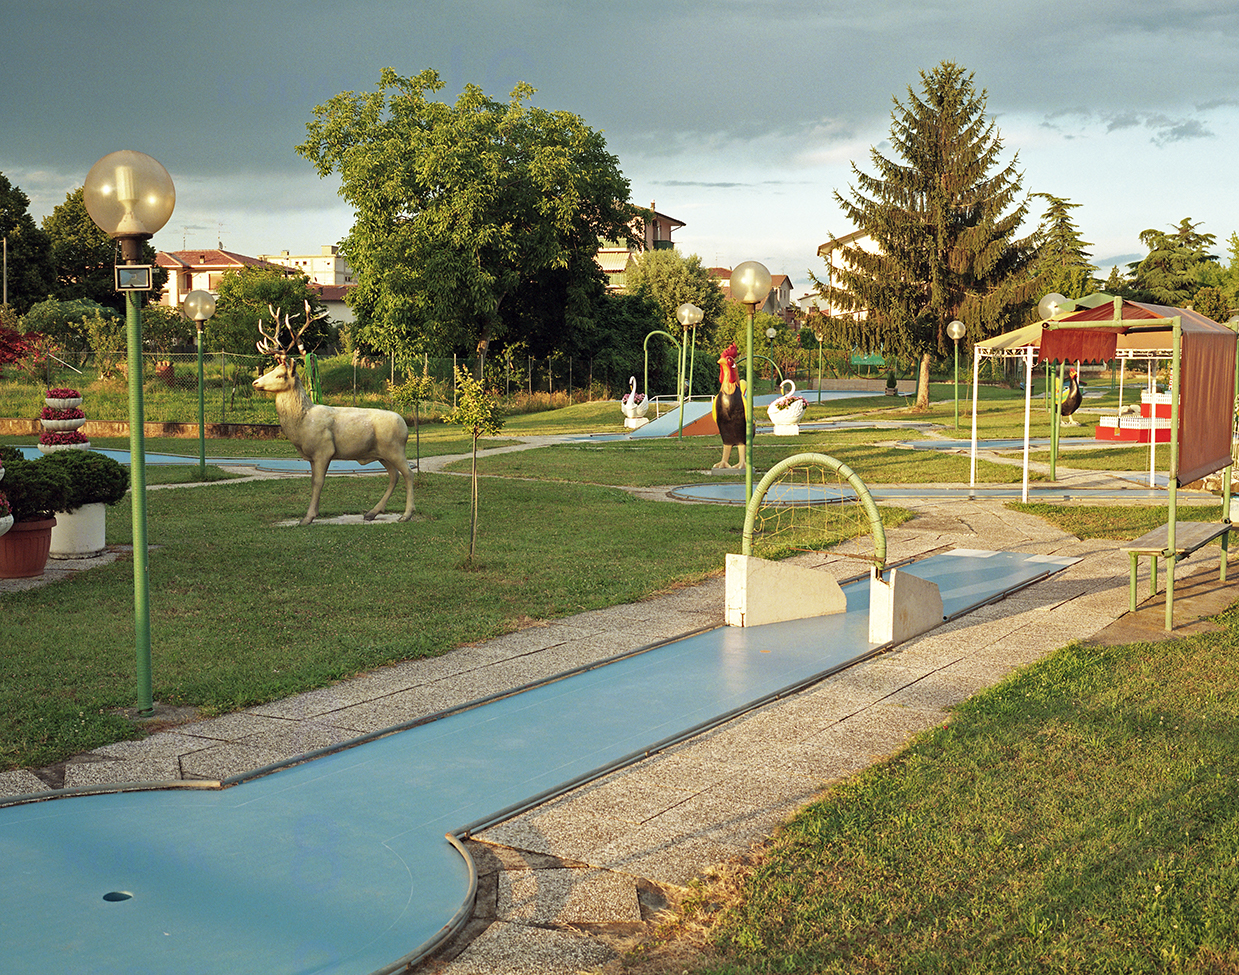  Olmo, 2018, Italy
Minigolf field at sunset in the small town of Olmo, nearby Vicenza 